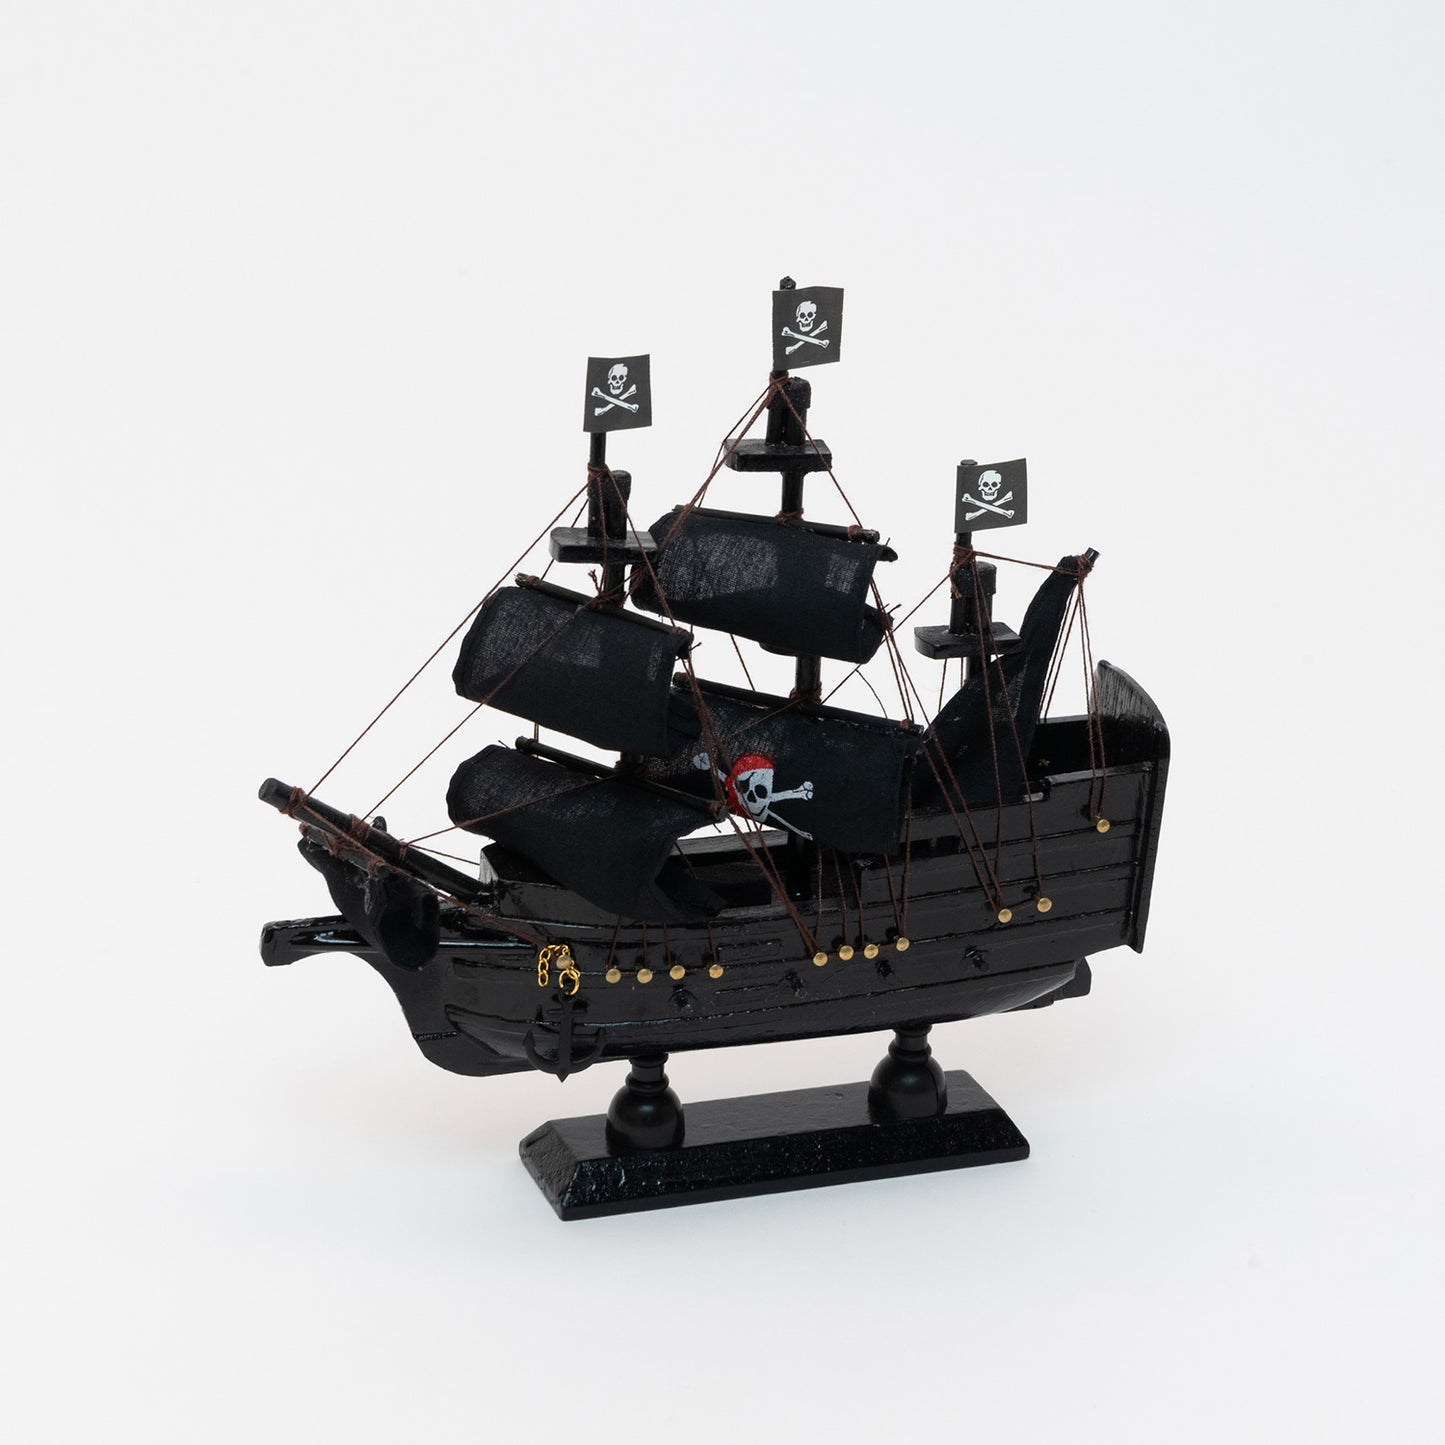 Side view of the black model pirate ship with a jolly roger on four of the black sails.